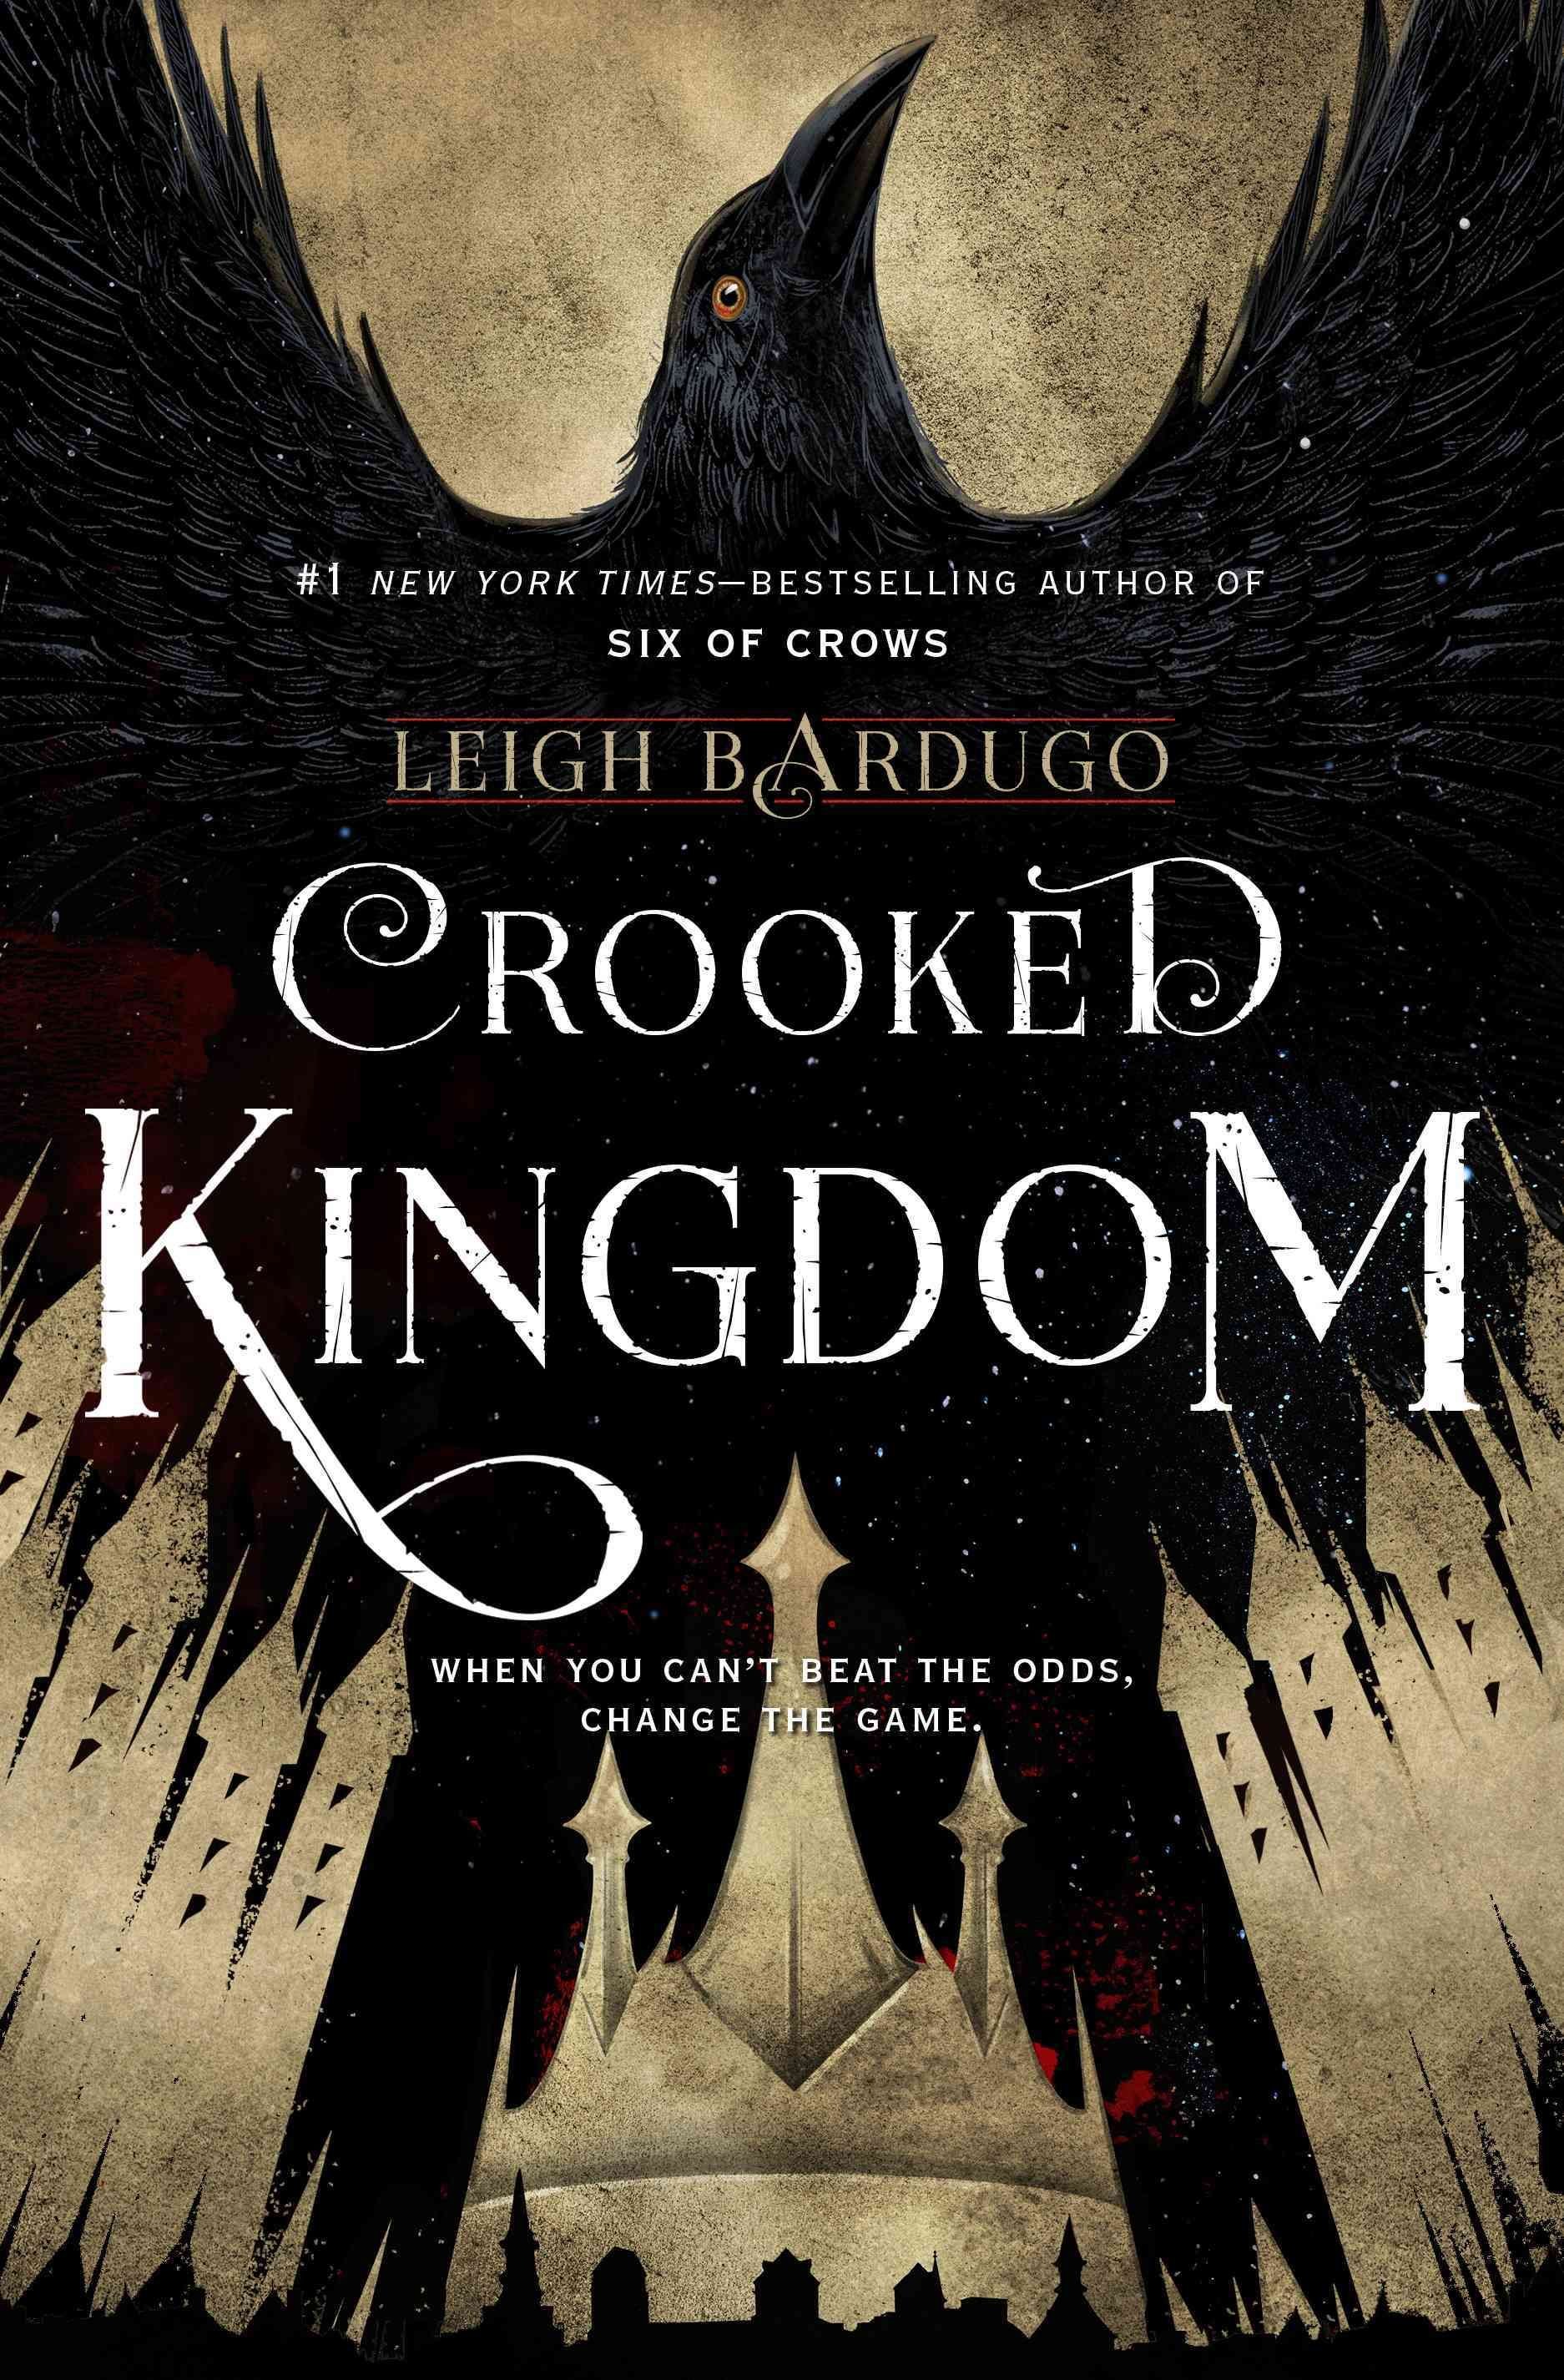 Image result for crooked kingdom leigh bardugo